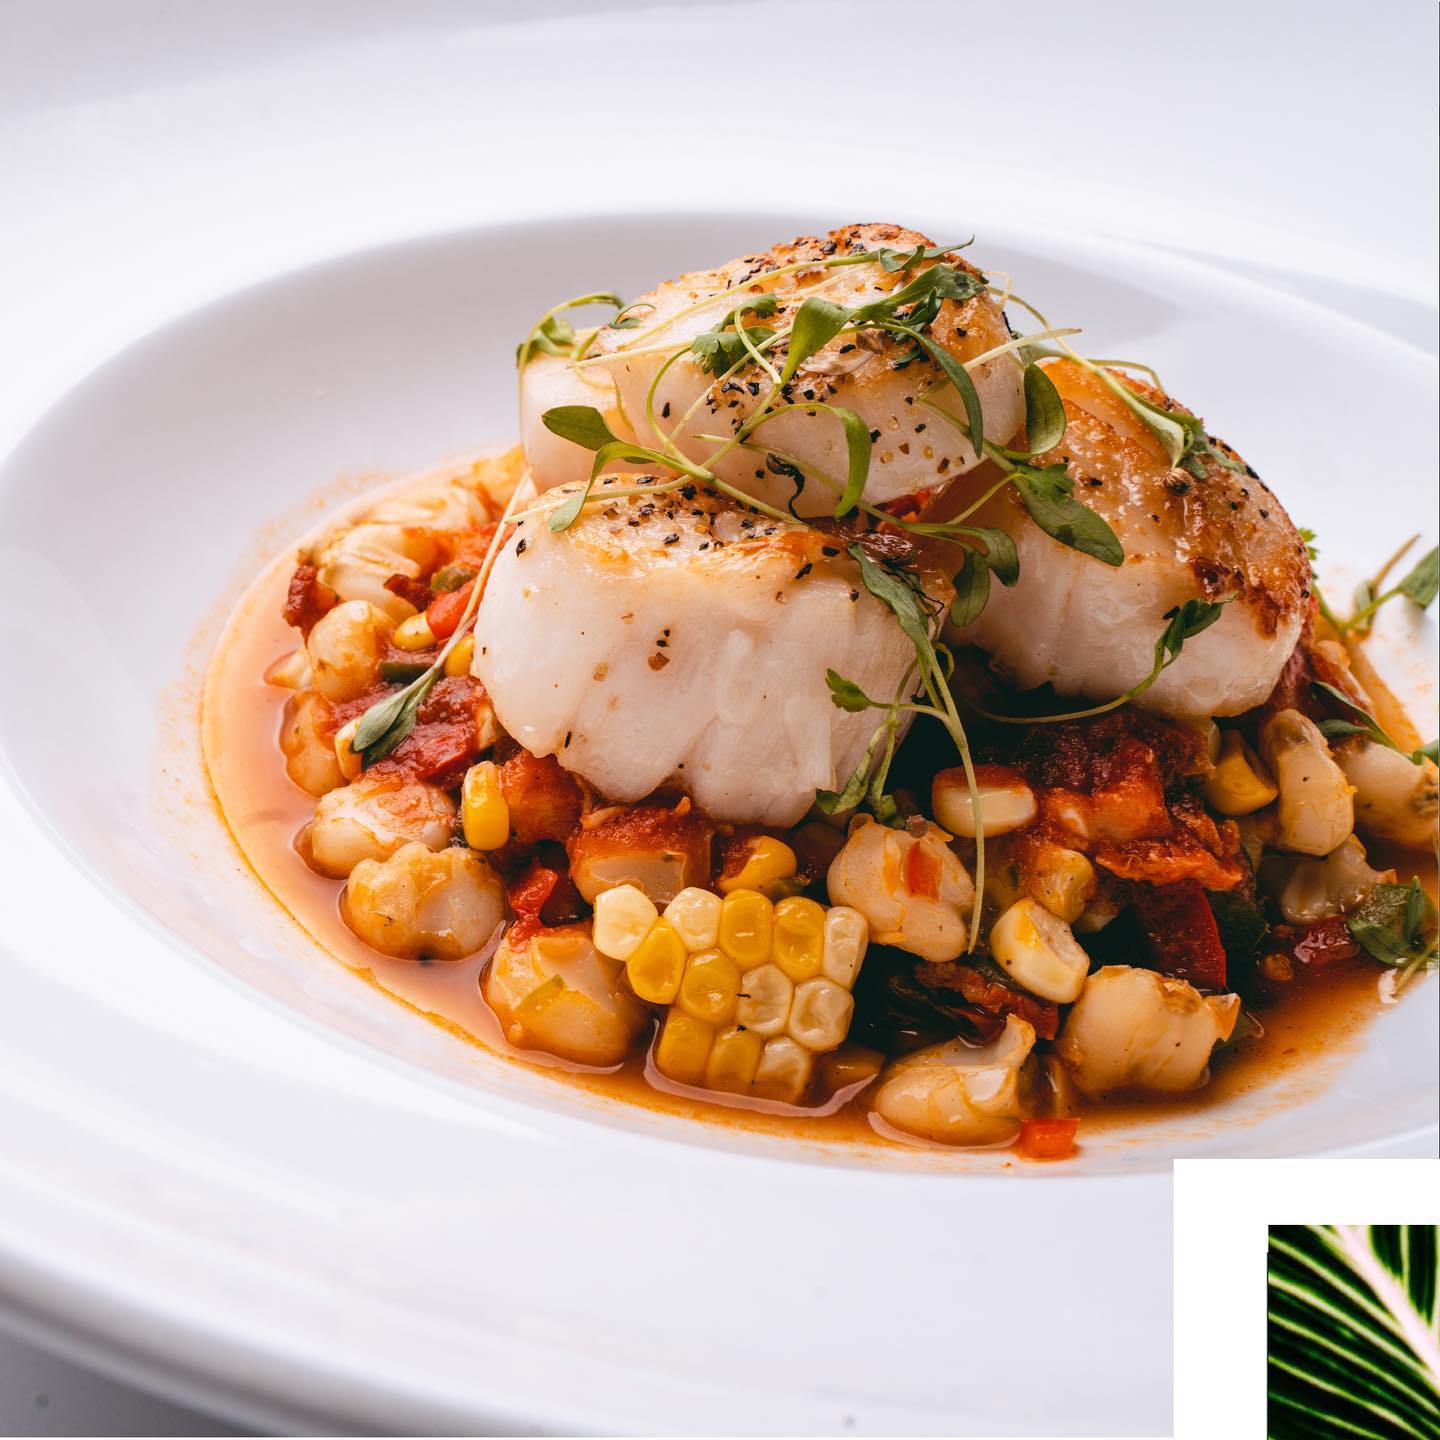 A dish of corn, mixed vegetables topped with three seared scallops